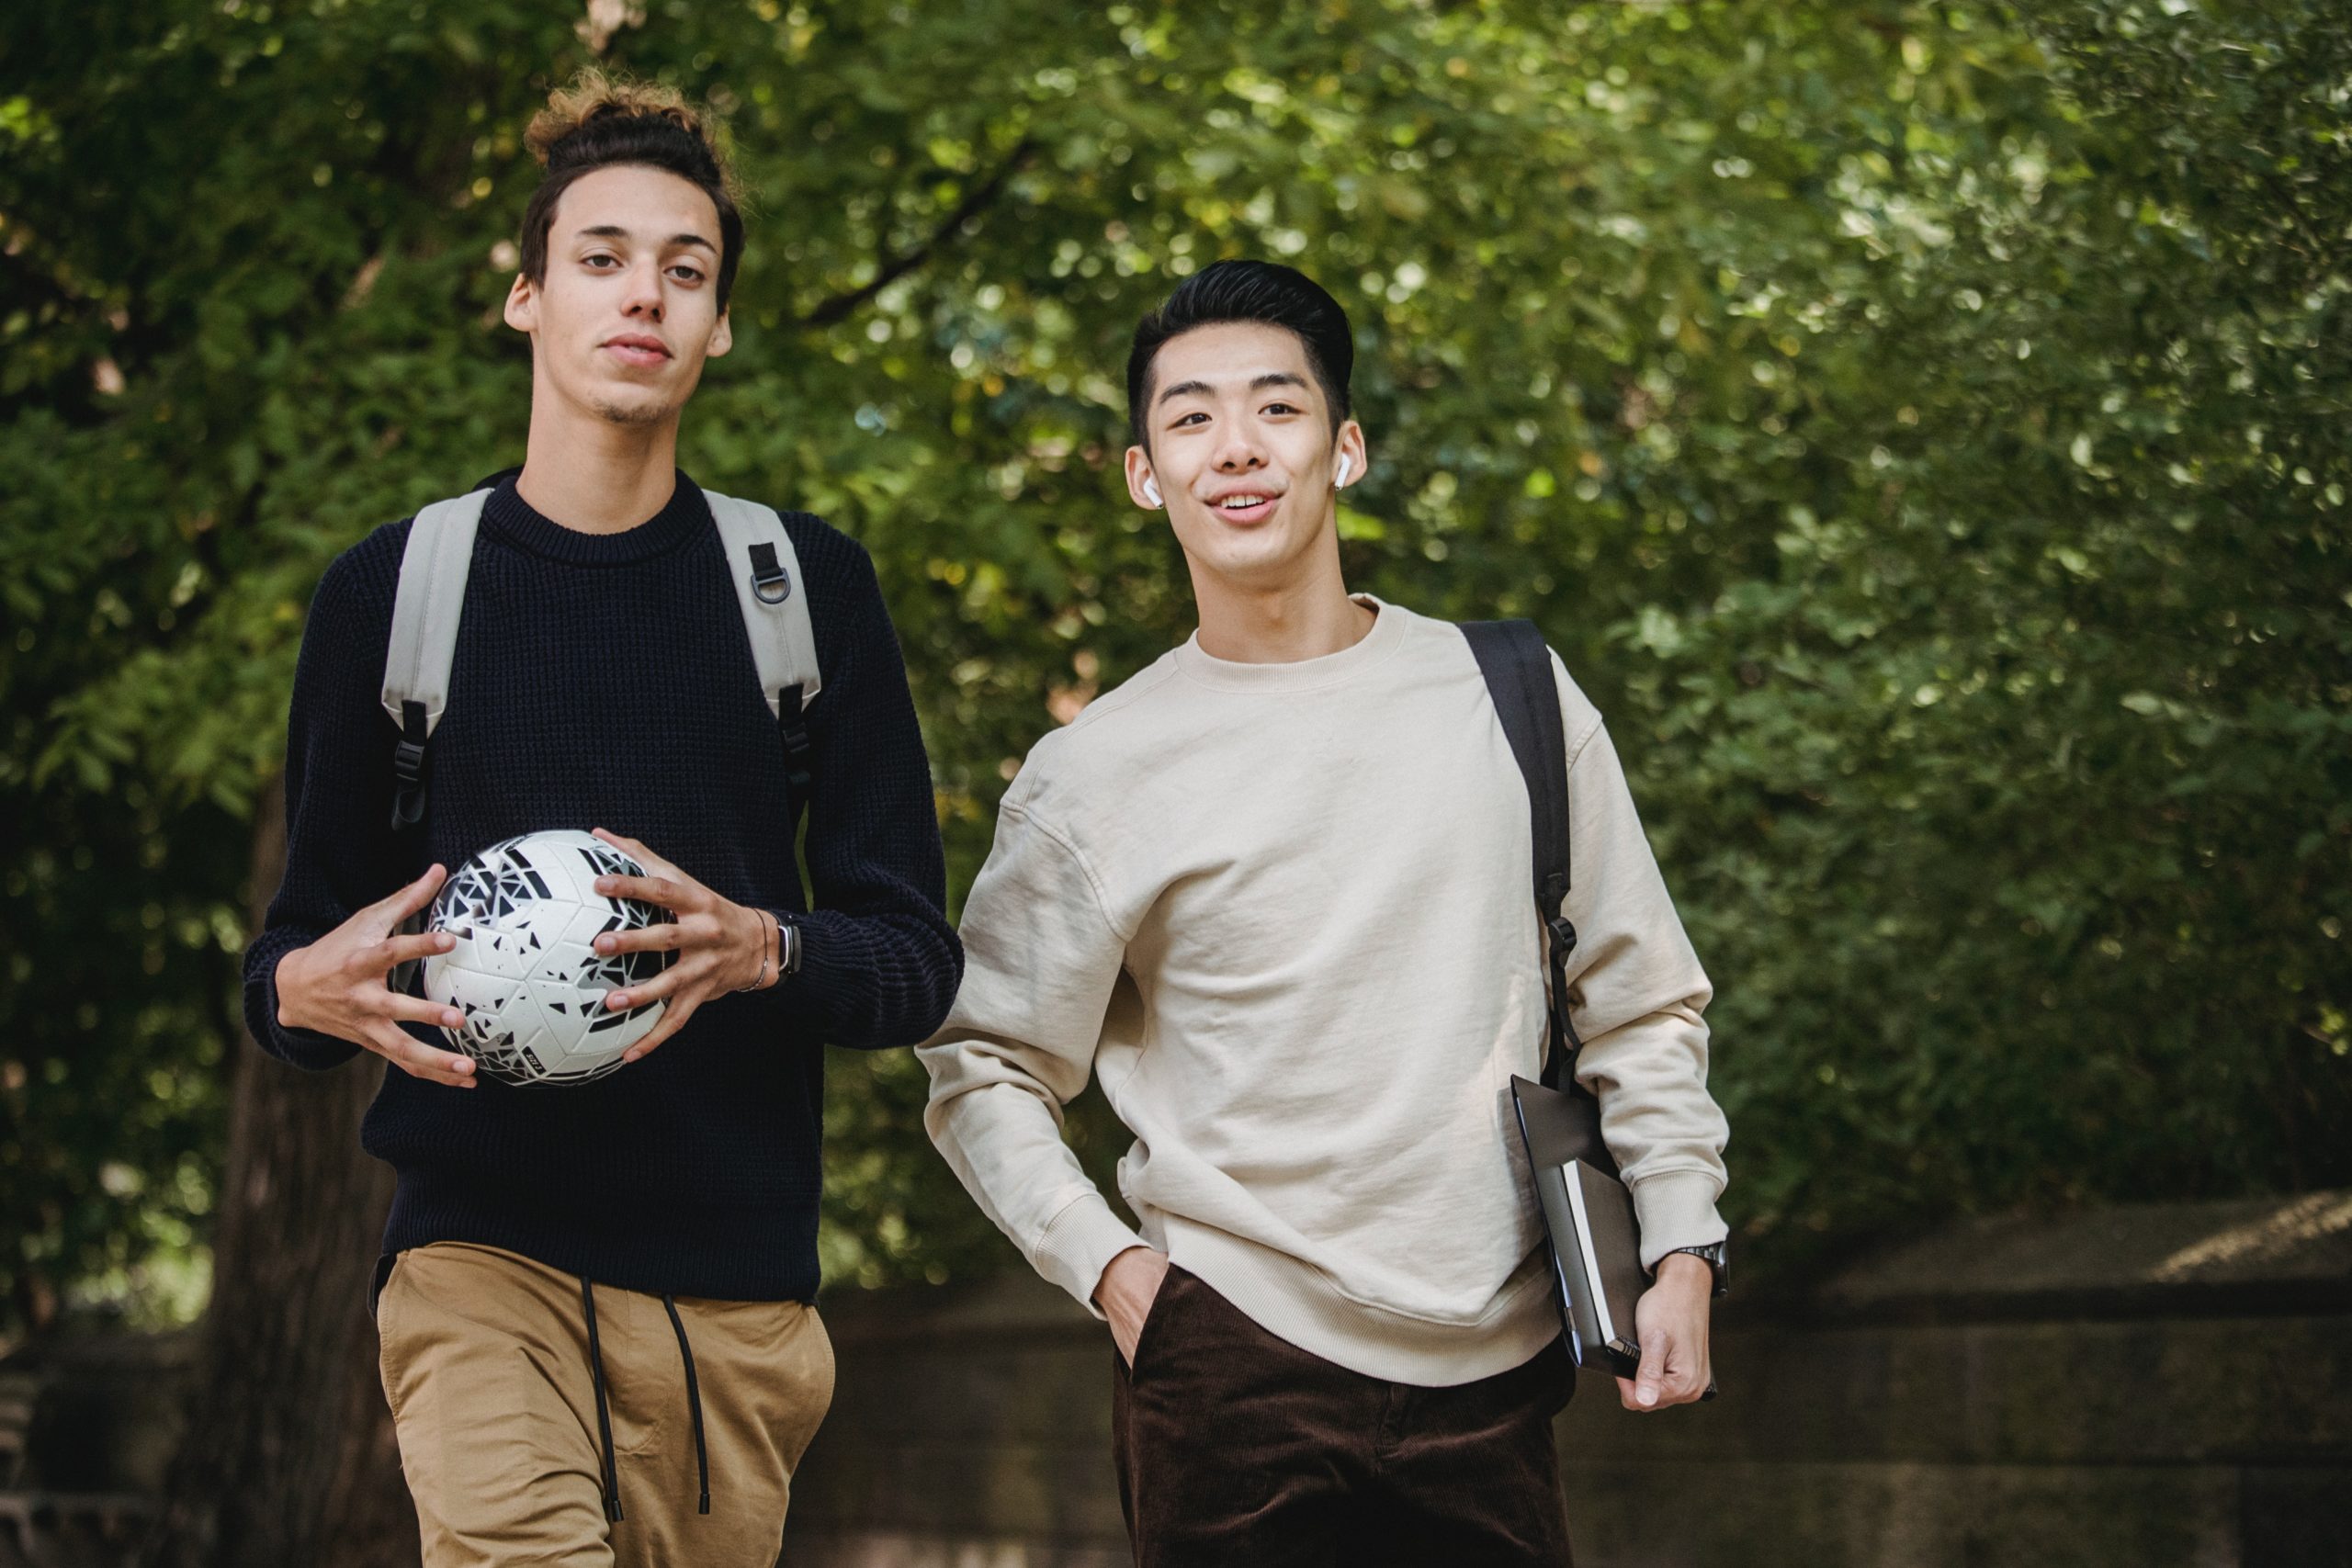 two male students walking in the park. one young man smiling with airpods in his ear and the other young man holding a soccer ball in both hands. green trees and foliage in the background